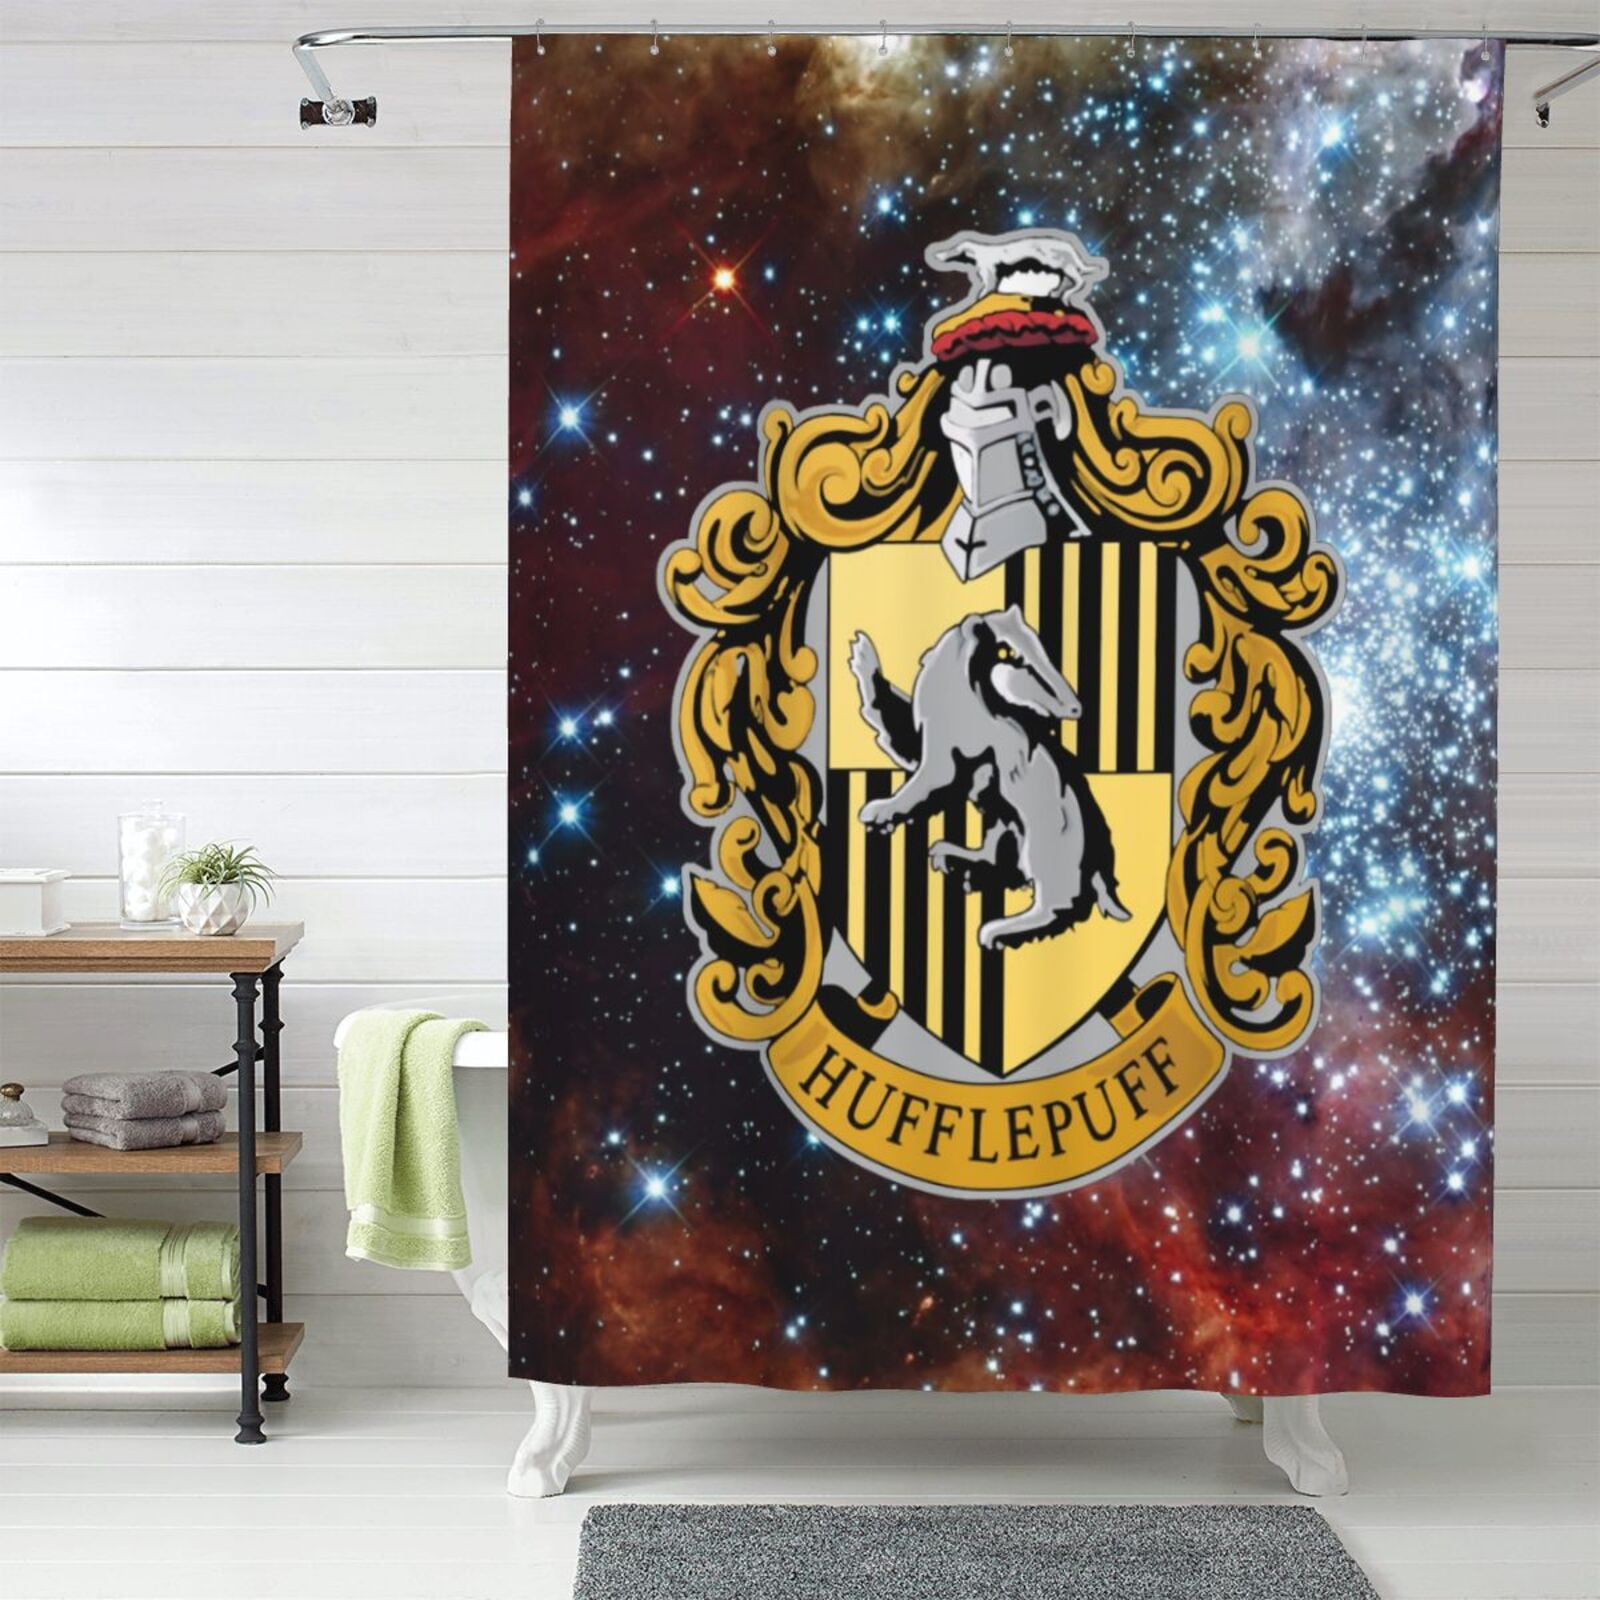 Robe Factory Harry Potter Ravenclaw Shower Curtain House Bathroom Decor  with Hook Rings